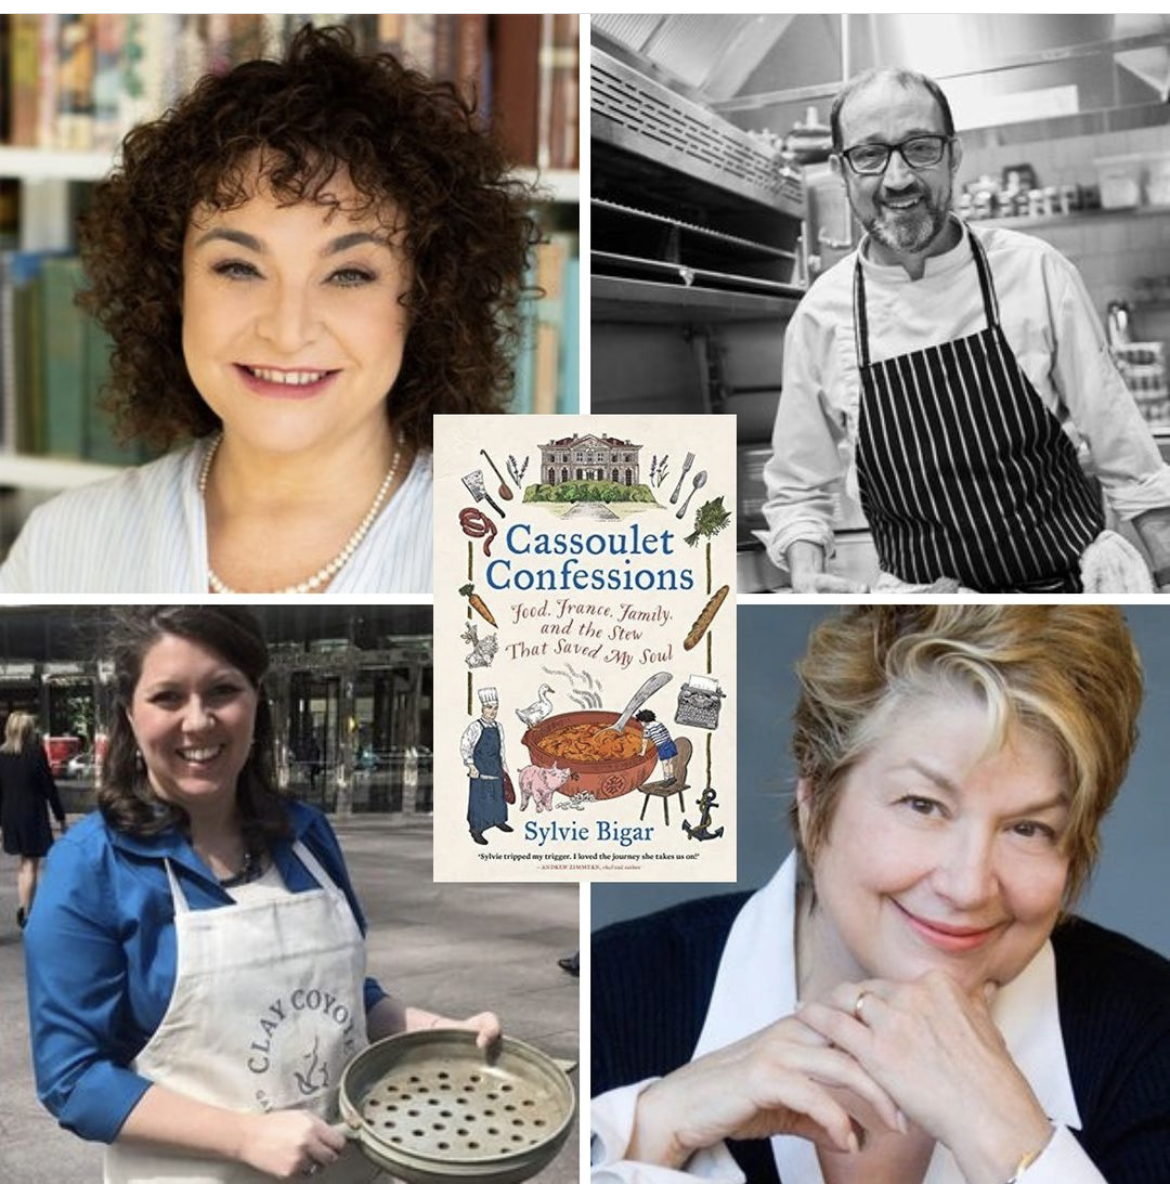 CASSOULET CONFESSIONS: AN EVENING WITH SYLVIE BIGAR, VINCENT FRANCOUAL, MORGAN BAUM AND LYNNE ROSSETTO KASPER